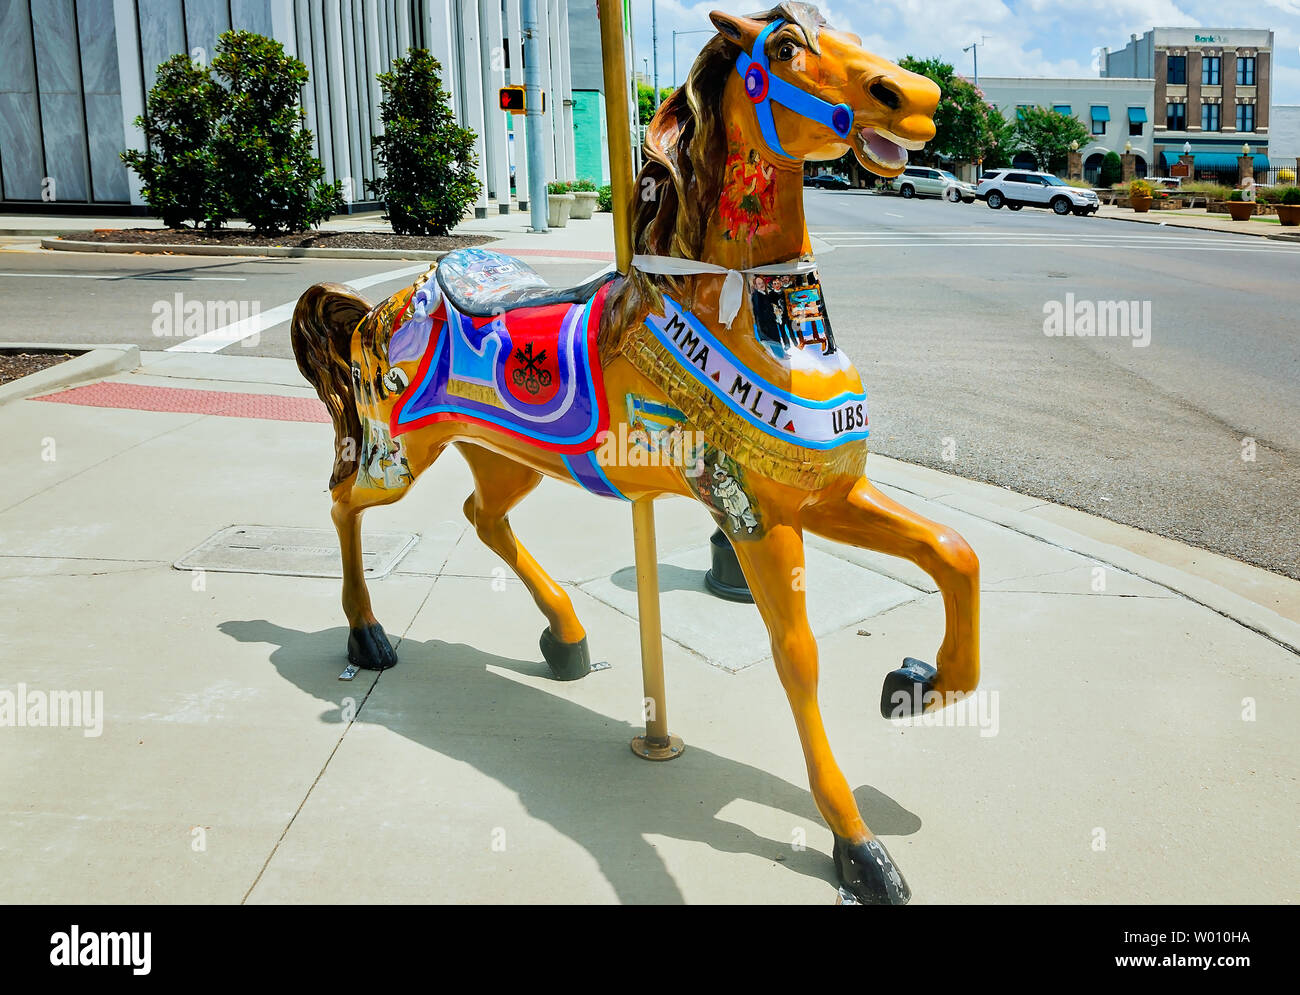 A carousel horse stands in downtown Meridian, Mississippi on June 23, 2019. The statue is one of 62 horses distributed throughout town. Stock Photo